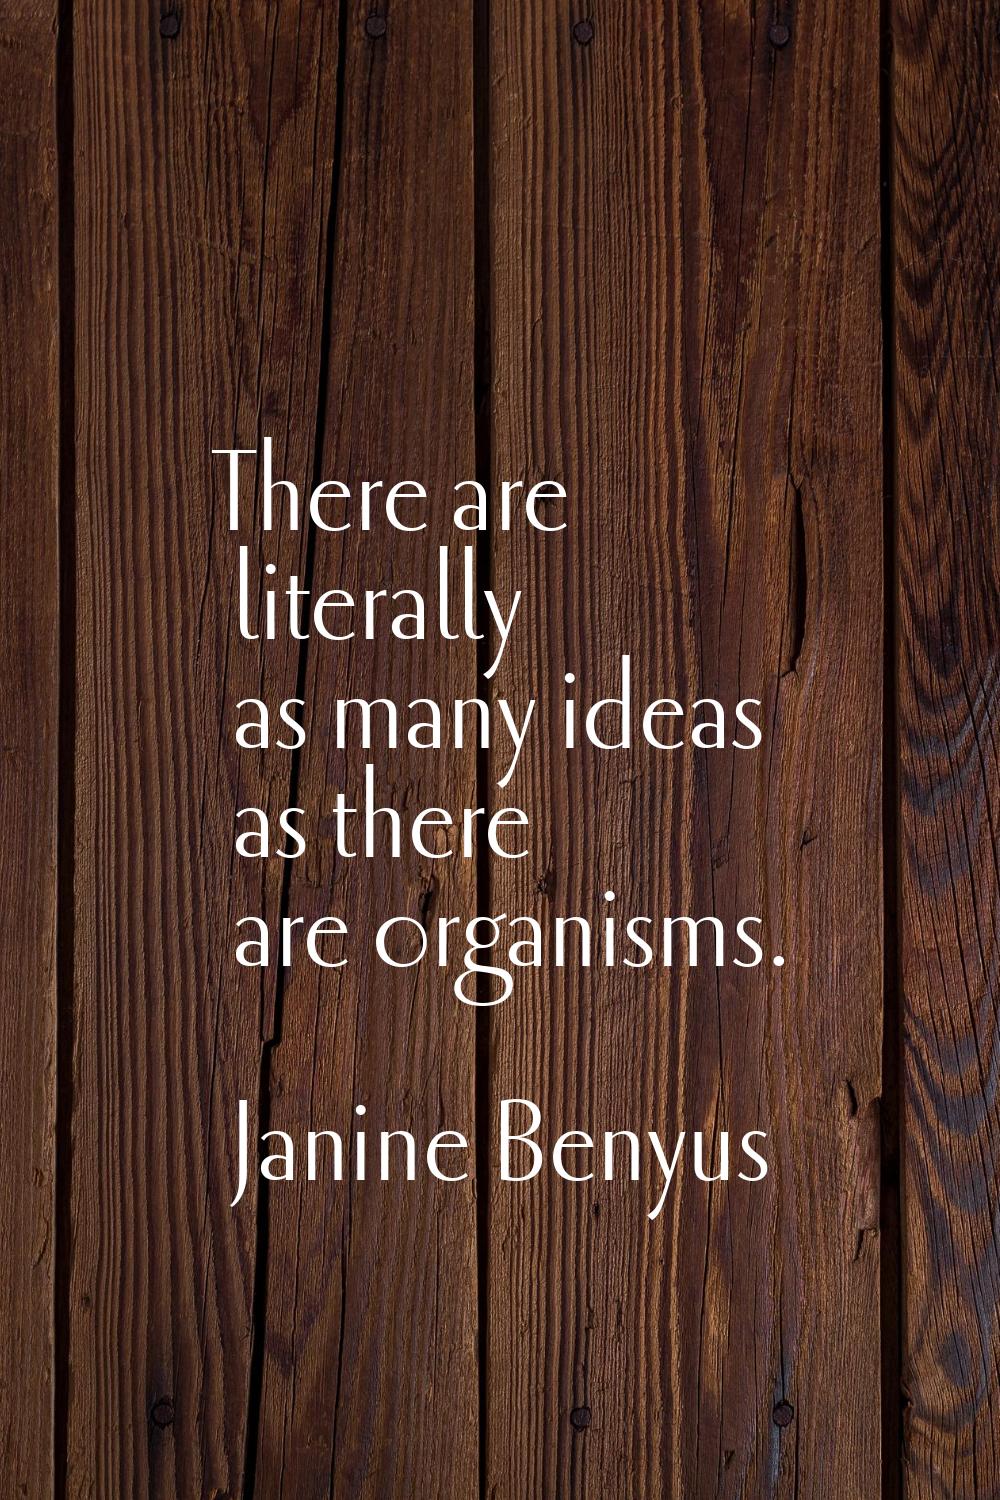 There are literally as many ideas as there are organisms.